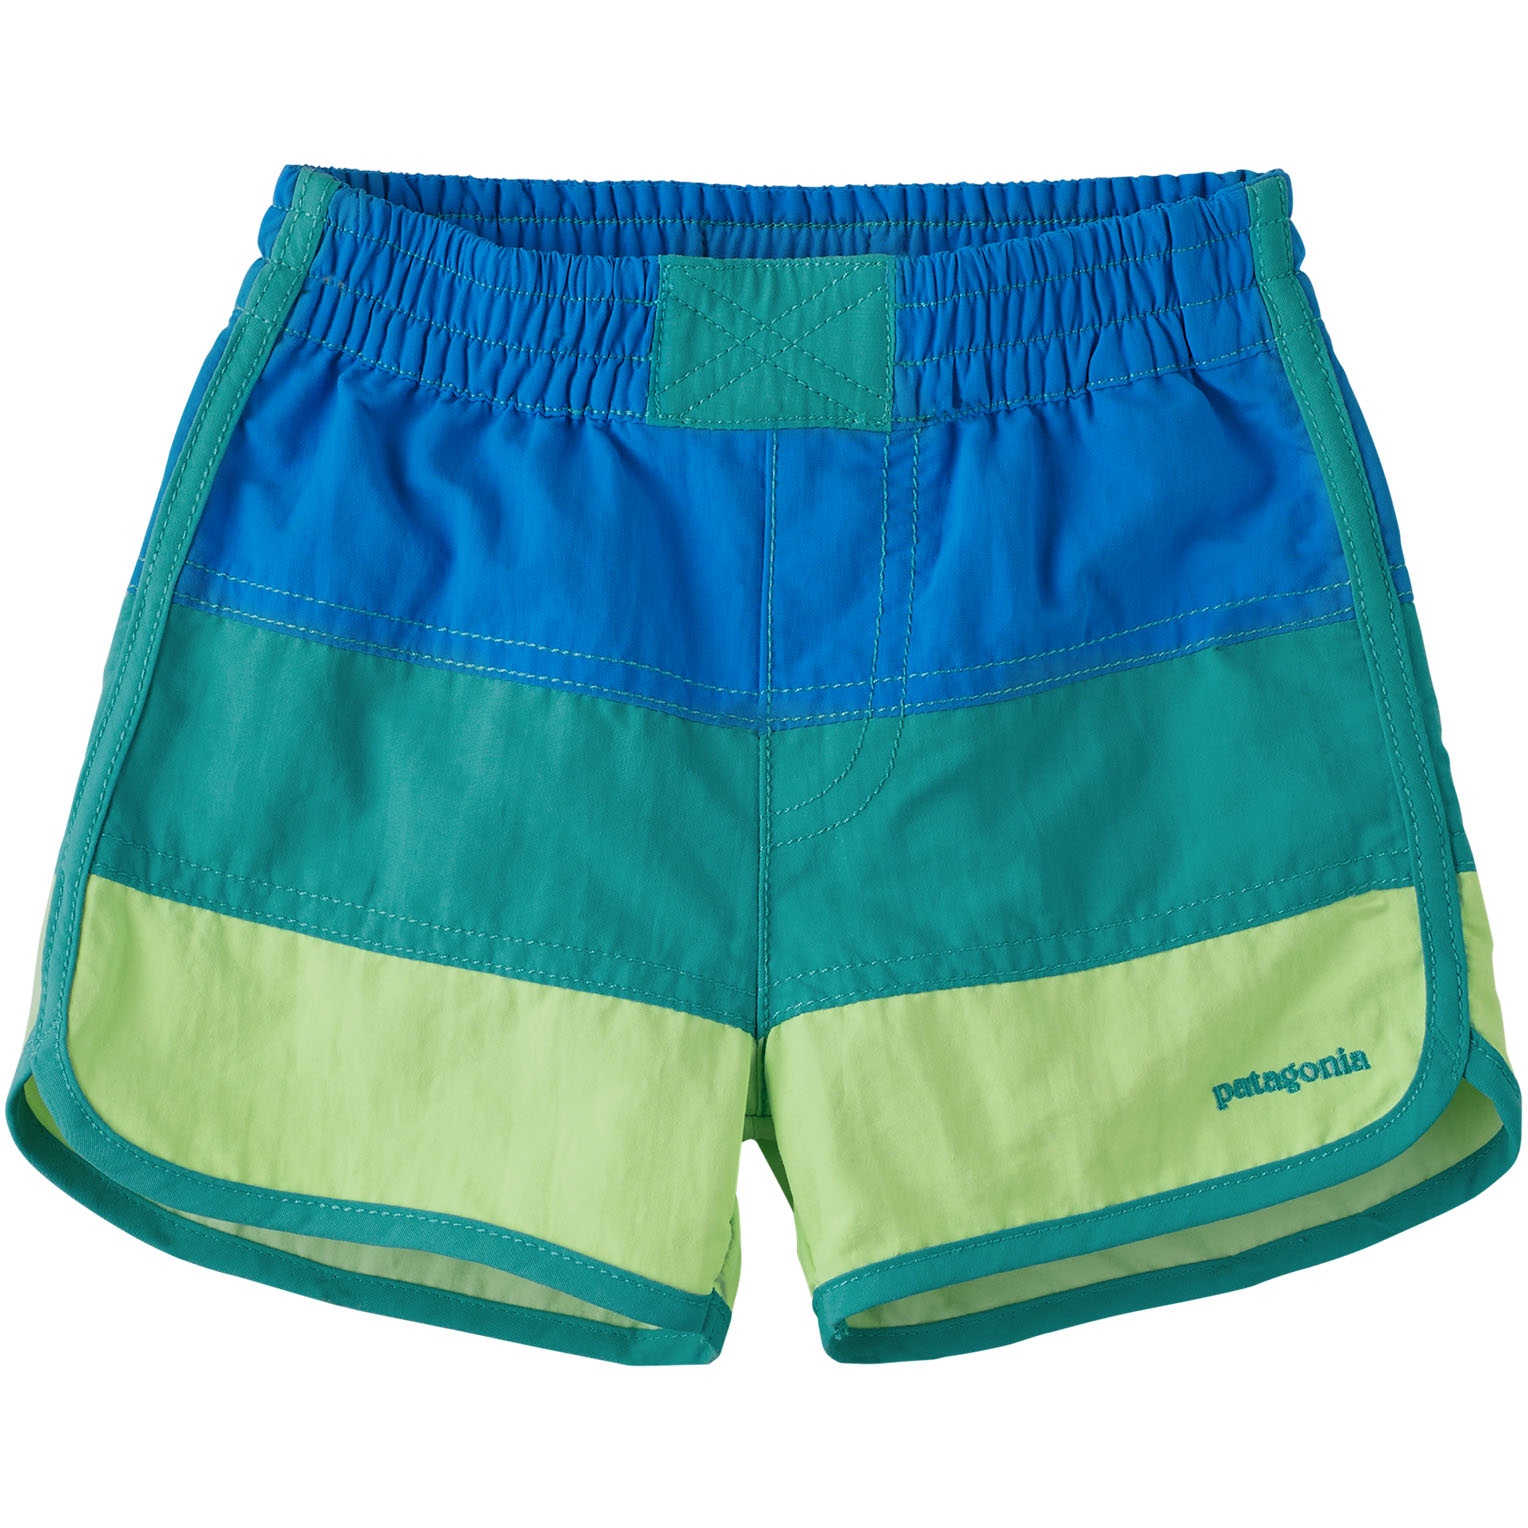 Picture of Patagonia Boardshorts Baby - Vessel Blue